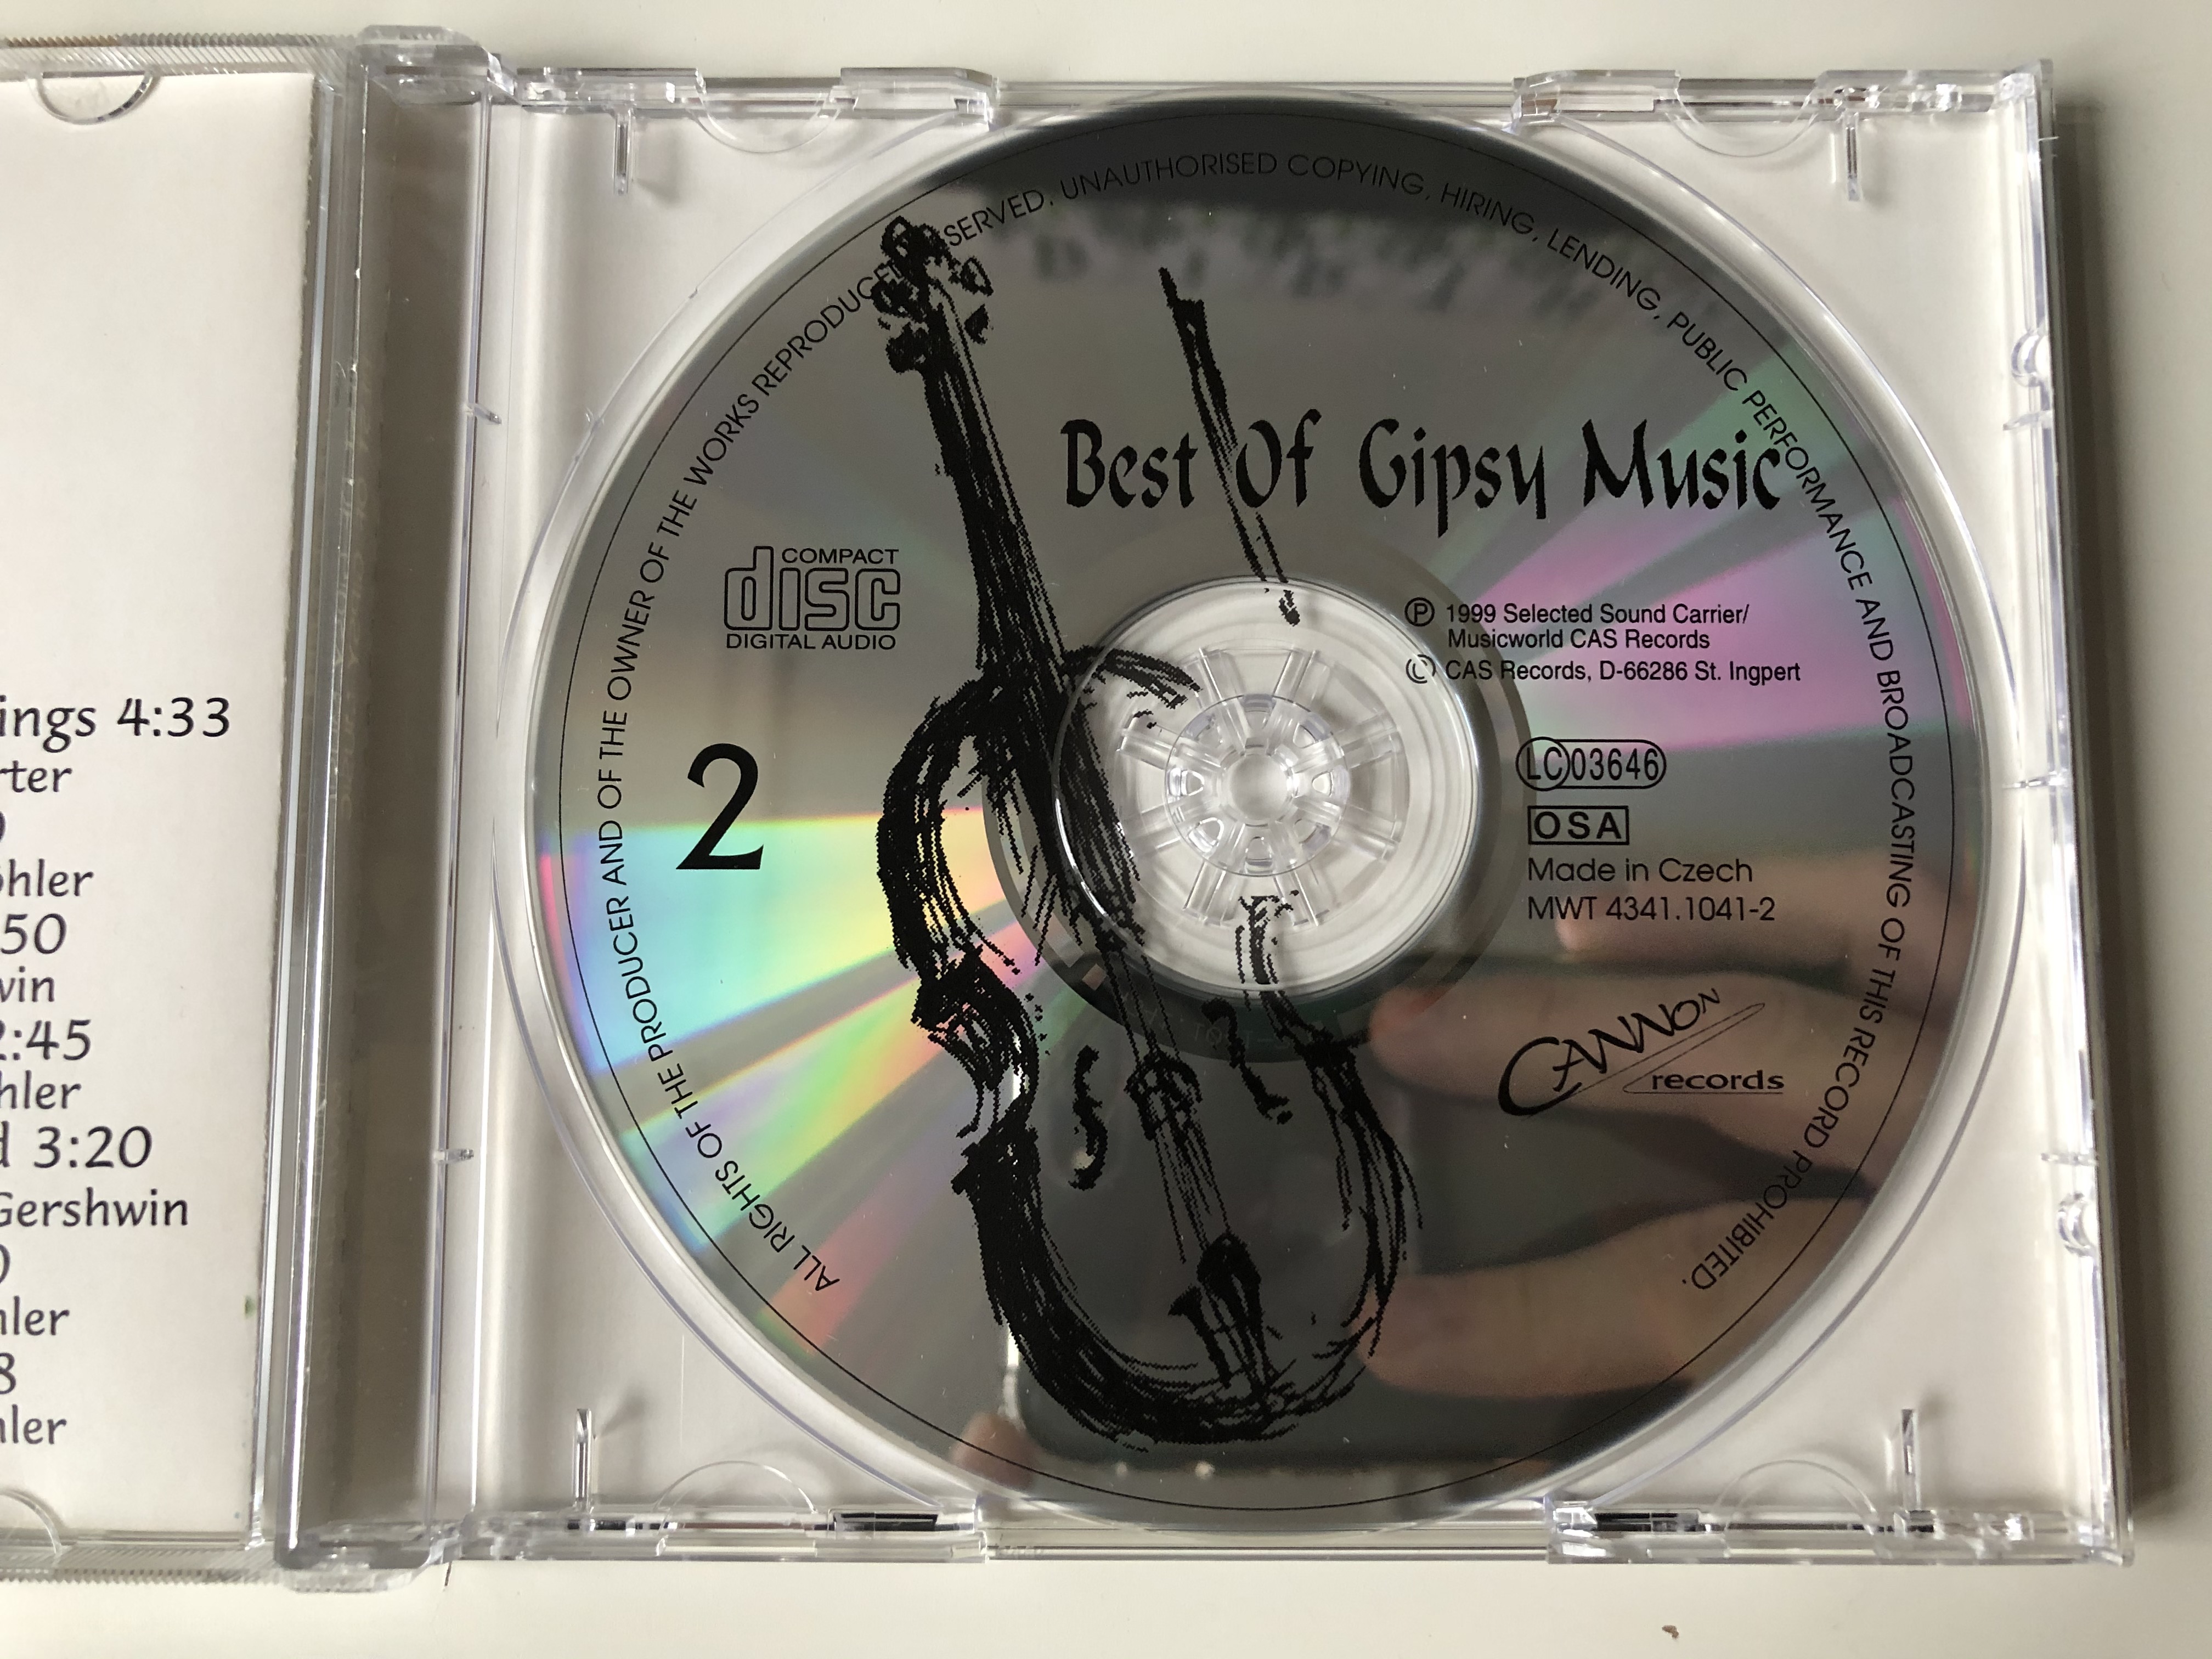 best-of-gipsy-music-2-cannon-records-audio-cd-1999-mwt-4341-3-.jpg